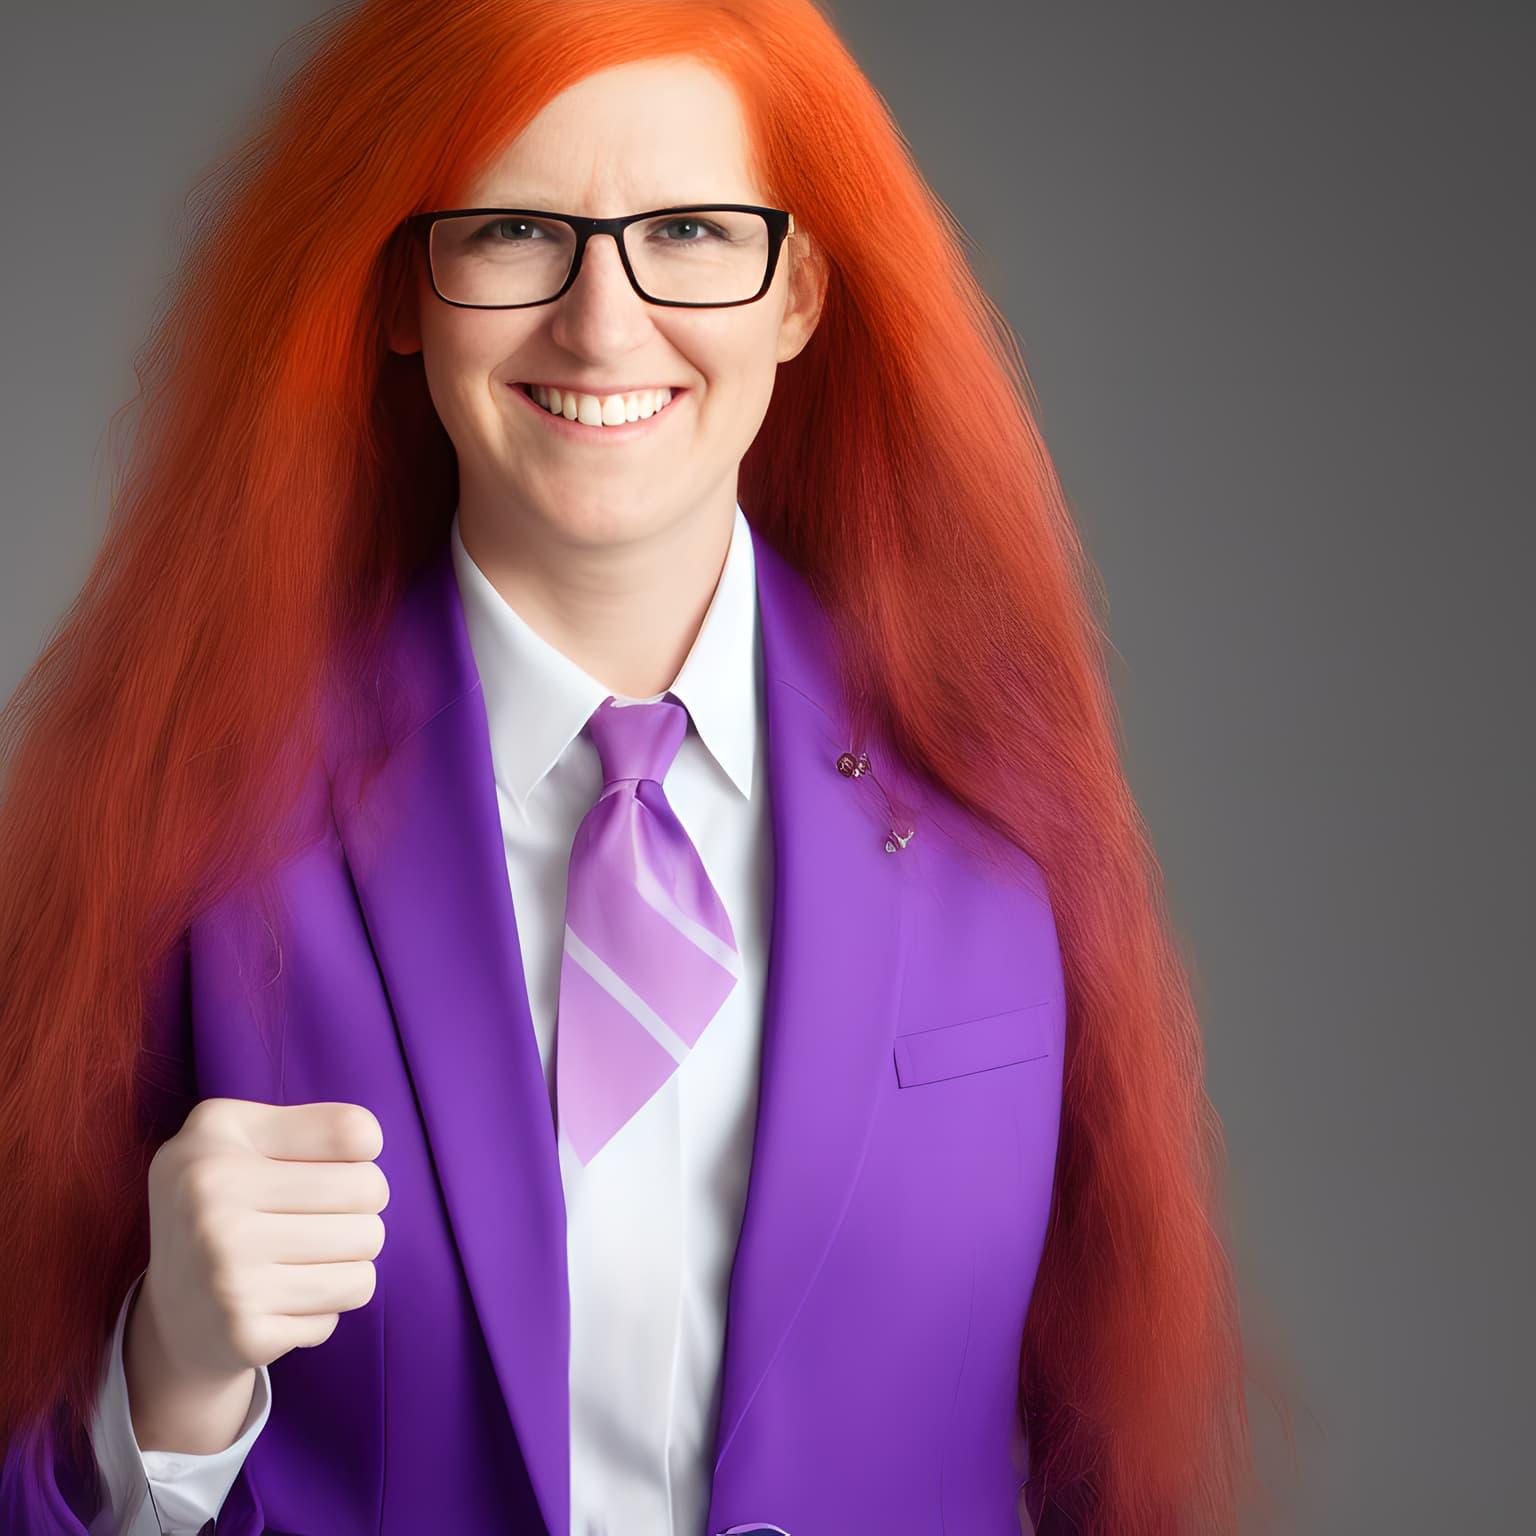 A happy, orange-haired middle-aged woman with very long hair, wearing glasses, a purple suit jacket, a white collared shirt, and a purple tie - sticking up a fist with one hand